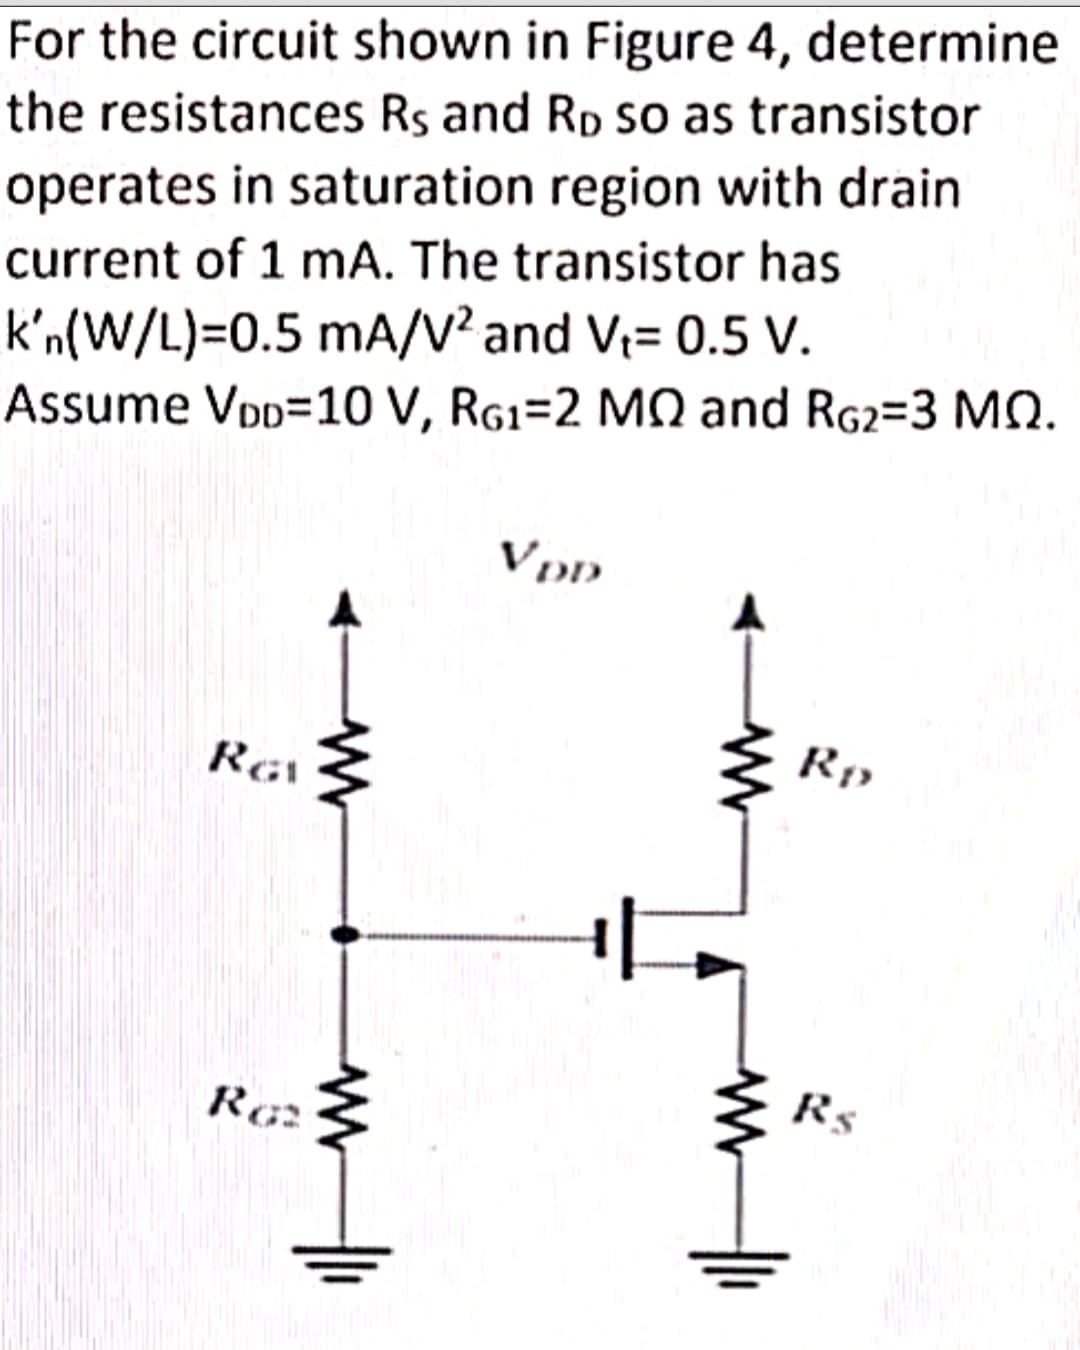 For the circuit shown in Figure 4, determine
the resistances Rs and RD so as transistor
operates in saturation region with drain
current of 1 mA. The transistor has
k'n(W/L)=0.5 mA/V² and V₁= 0.5 V.
Assume VDD
10 V, RG1-2 MQ and RG2-3 MQ.
RGV
RG2
WW
www
VDD
www
W
Rp
Rs